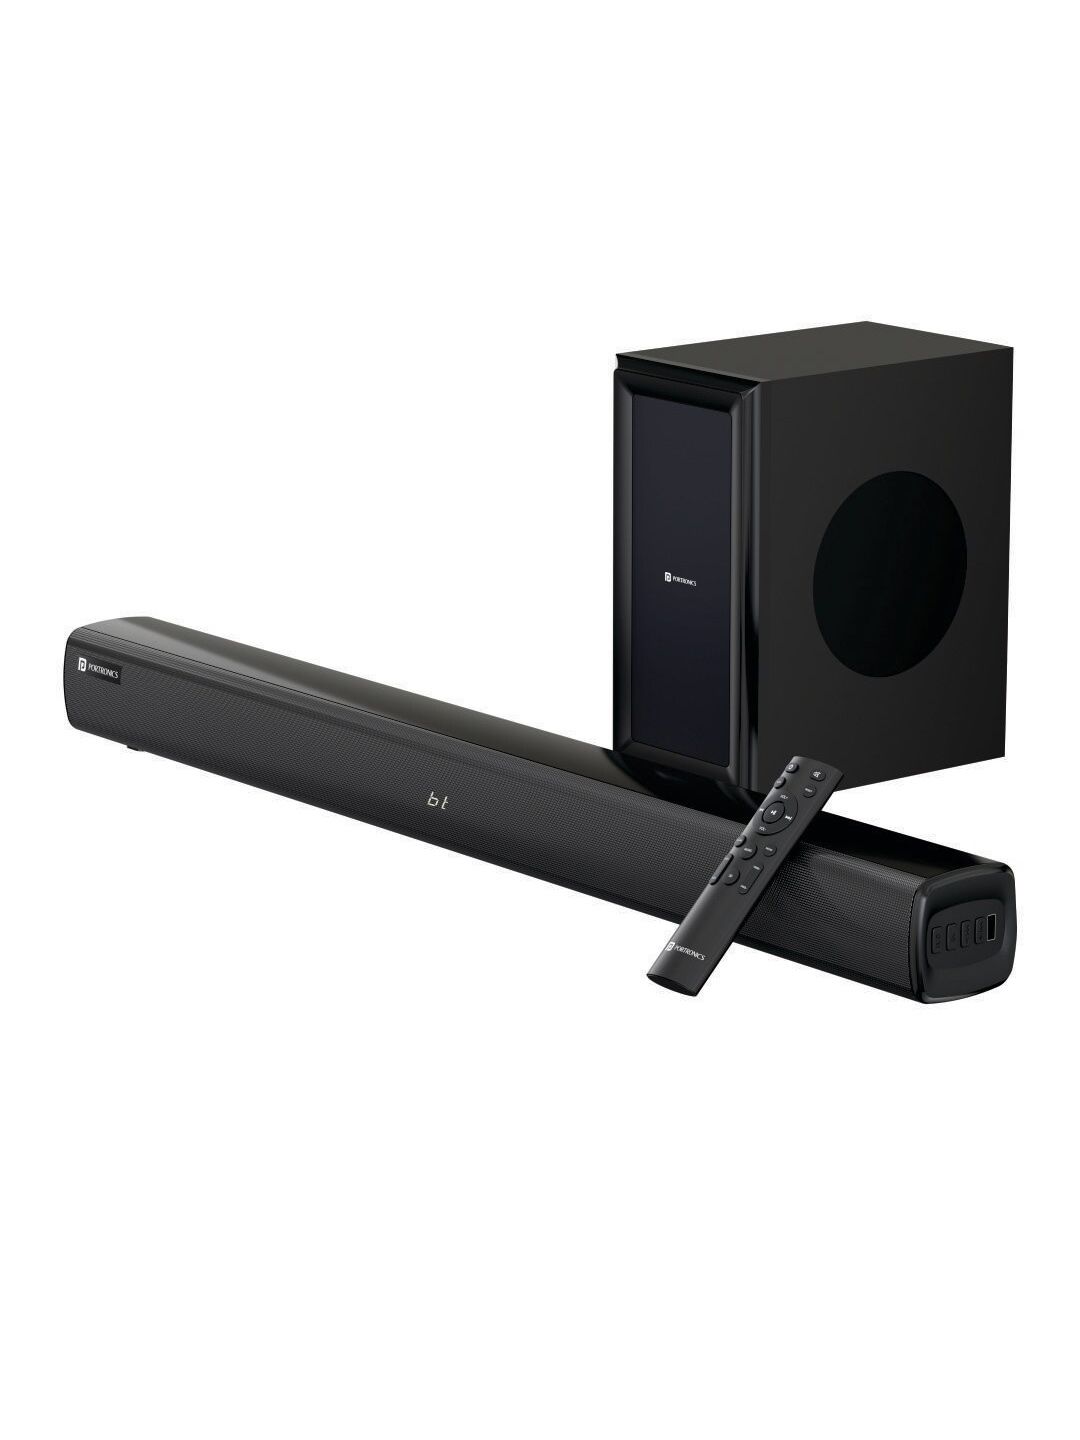 Portronics Black Solid Pure Sound 102 Bluetooth Soundbar With Wireless Woofer Price in India